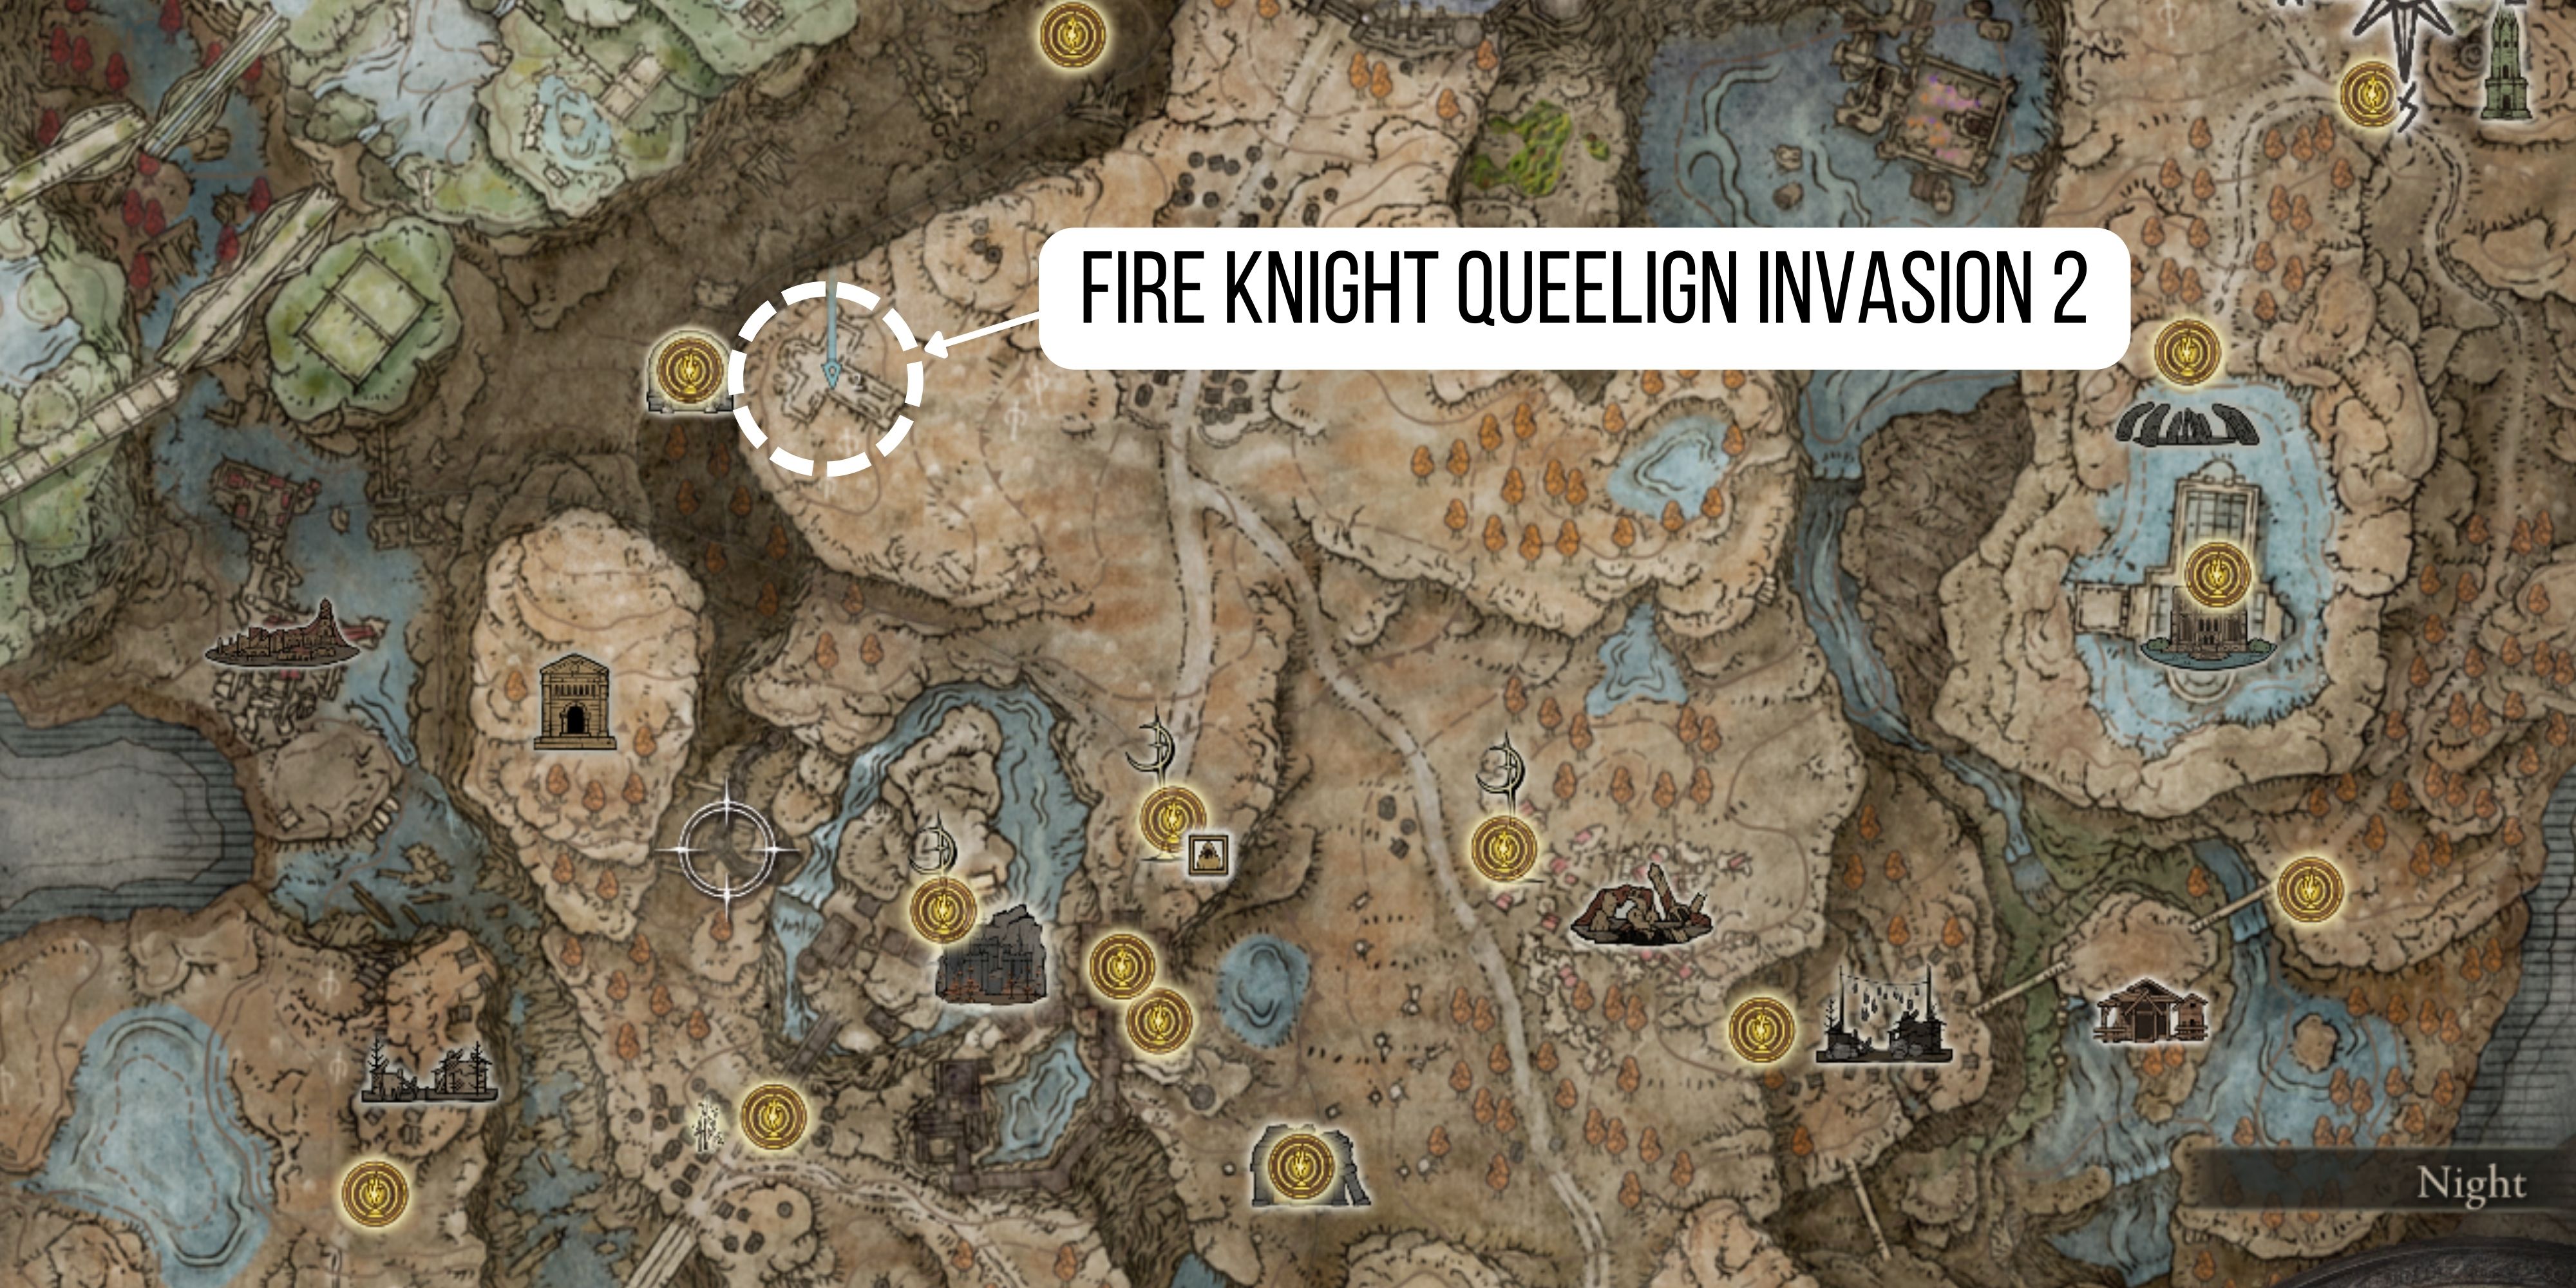 Fire Knight Queelign Invasion 2 location in elden ring shadow of the erdtree